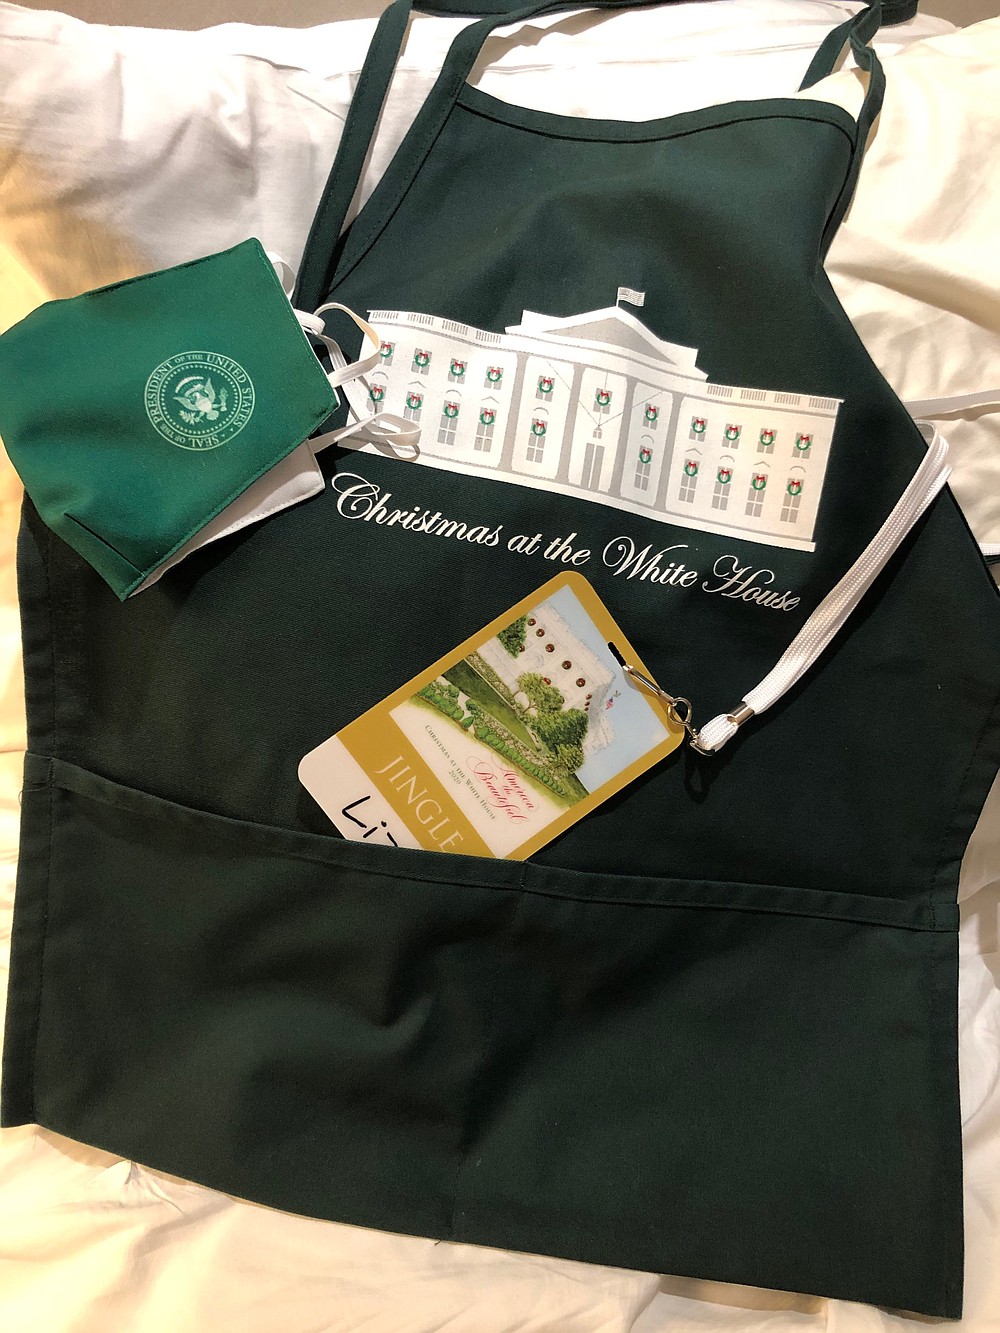 Liz Bullock’s apron, group badge and mask that she used while decorating the White House for Christmas this year. (Contributed)